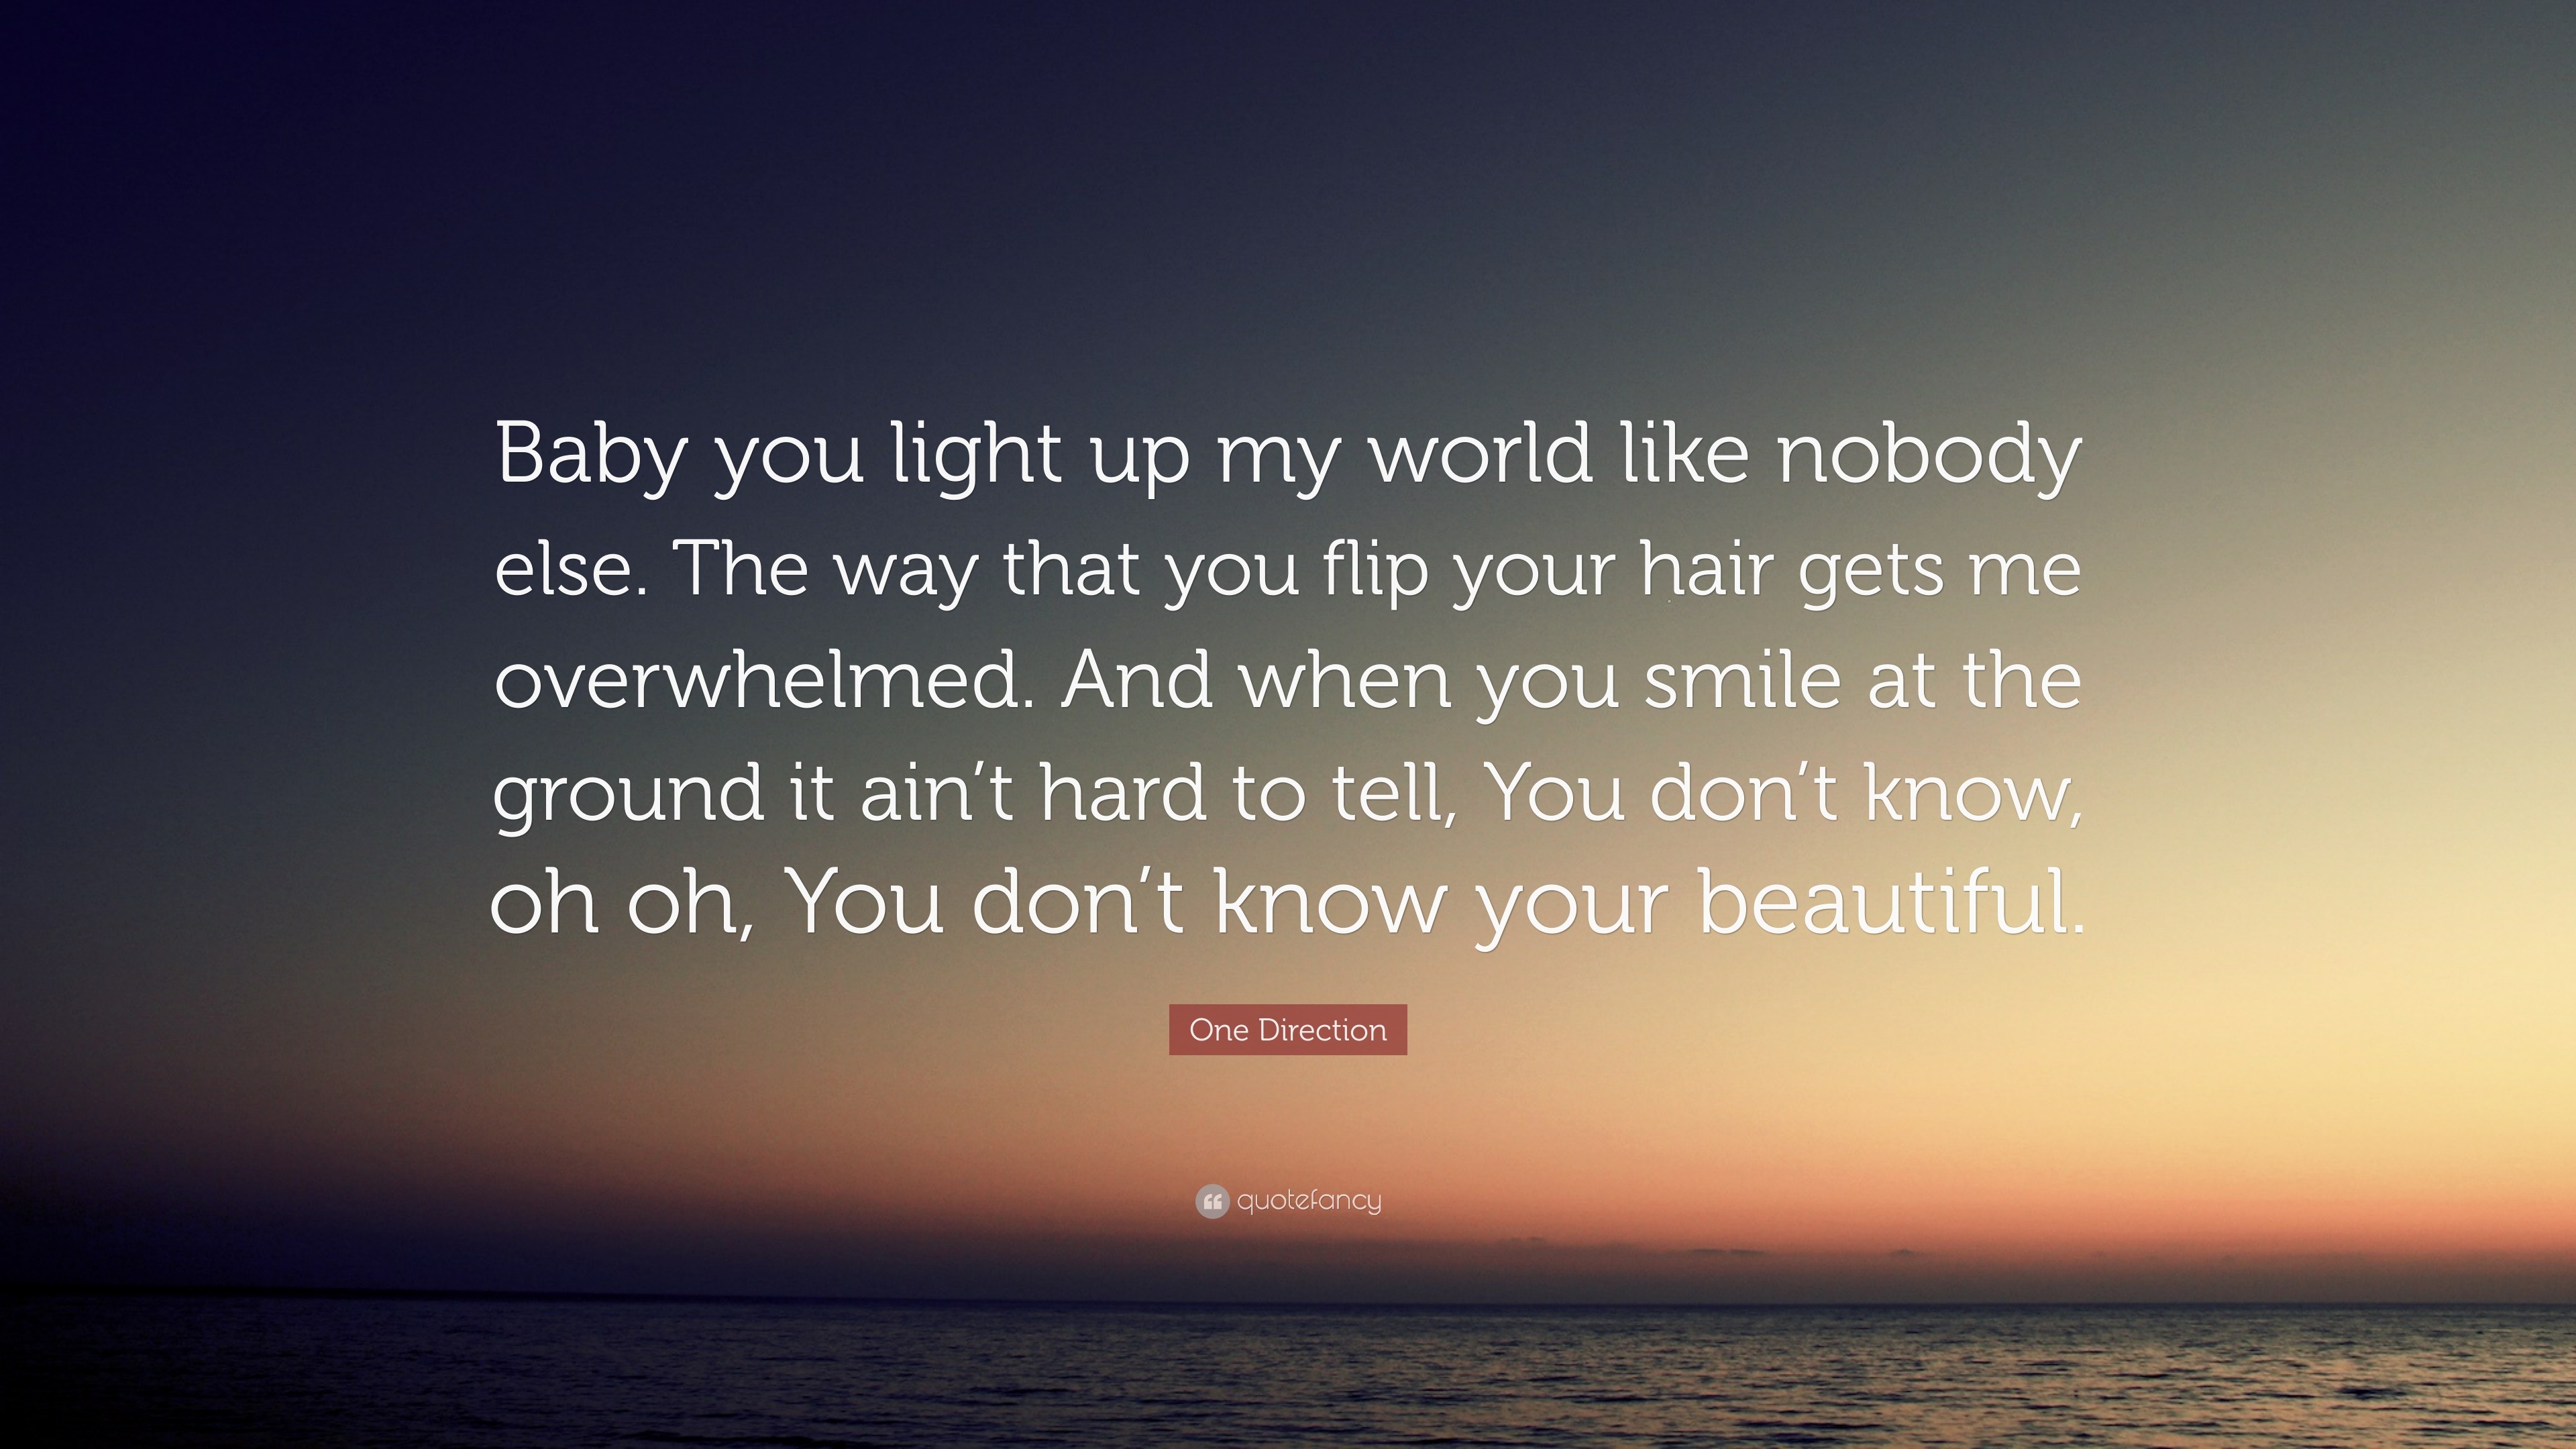 e Direction Quote “Baby you light up my world like nobody else The